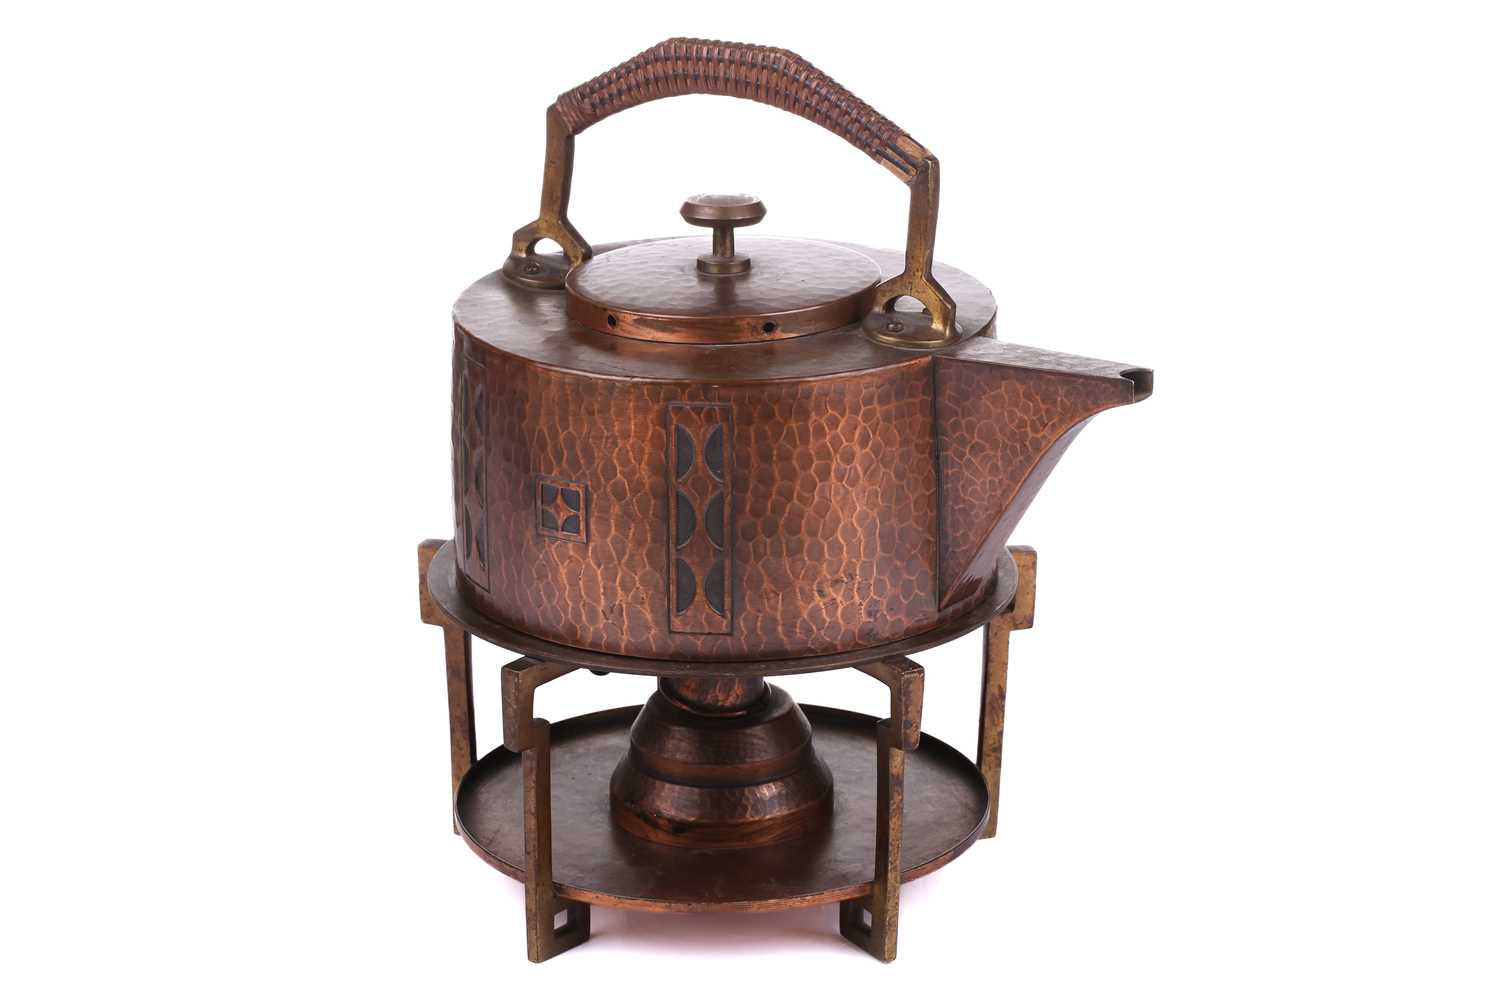 An early 20th century Arts & Crafts style WMF planished copper and brass spirit kettle, burner and - Image 3 of 12